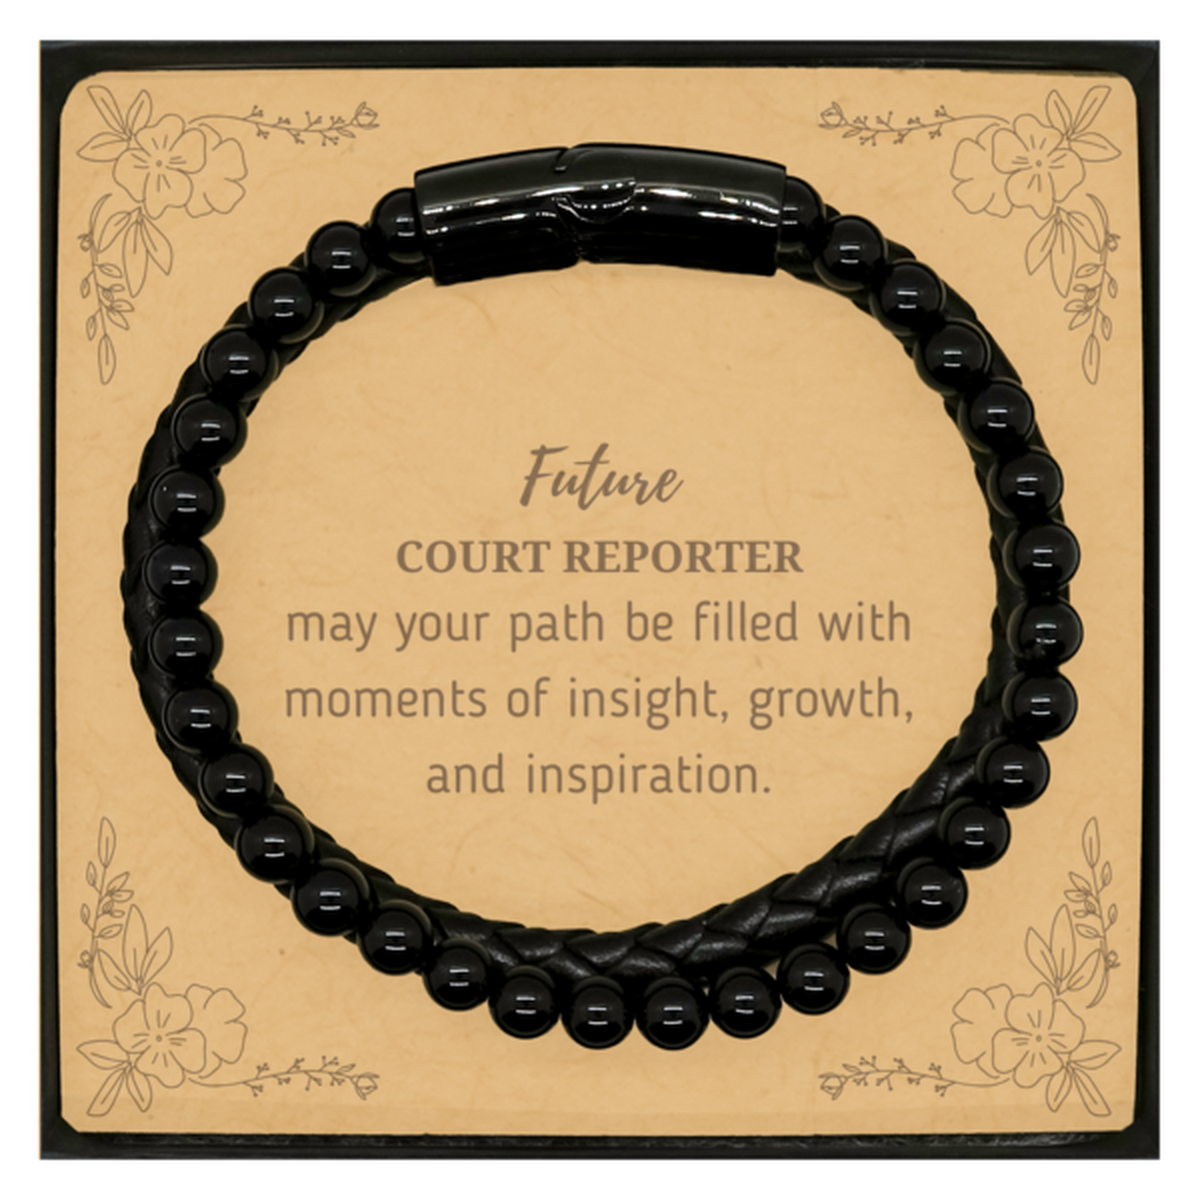 Future Court Reporter Gifts, May your path be filled with moments of insight, Graduation Gifts for New Court Reporter, Christmas Unique Stone Leather Bracelets For Men, Women, Friends